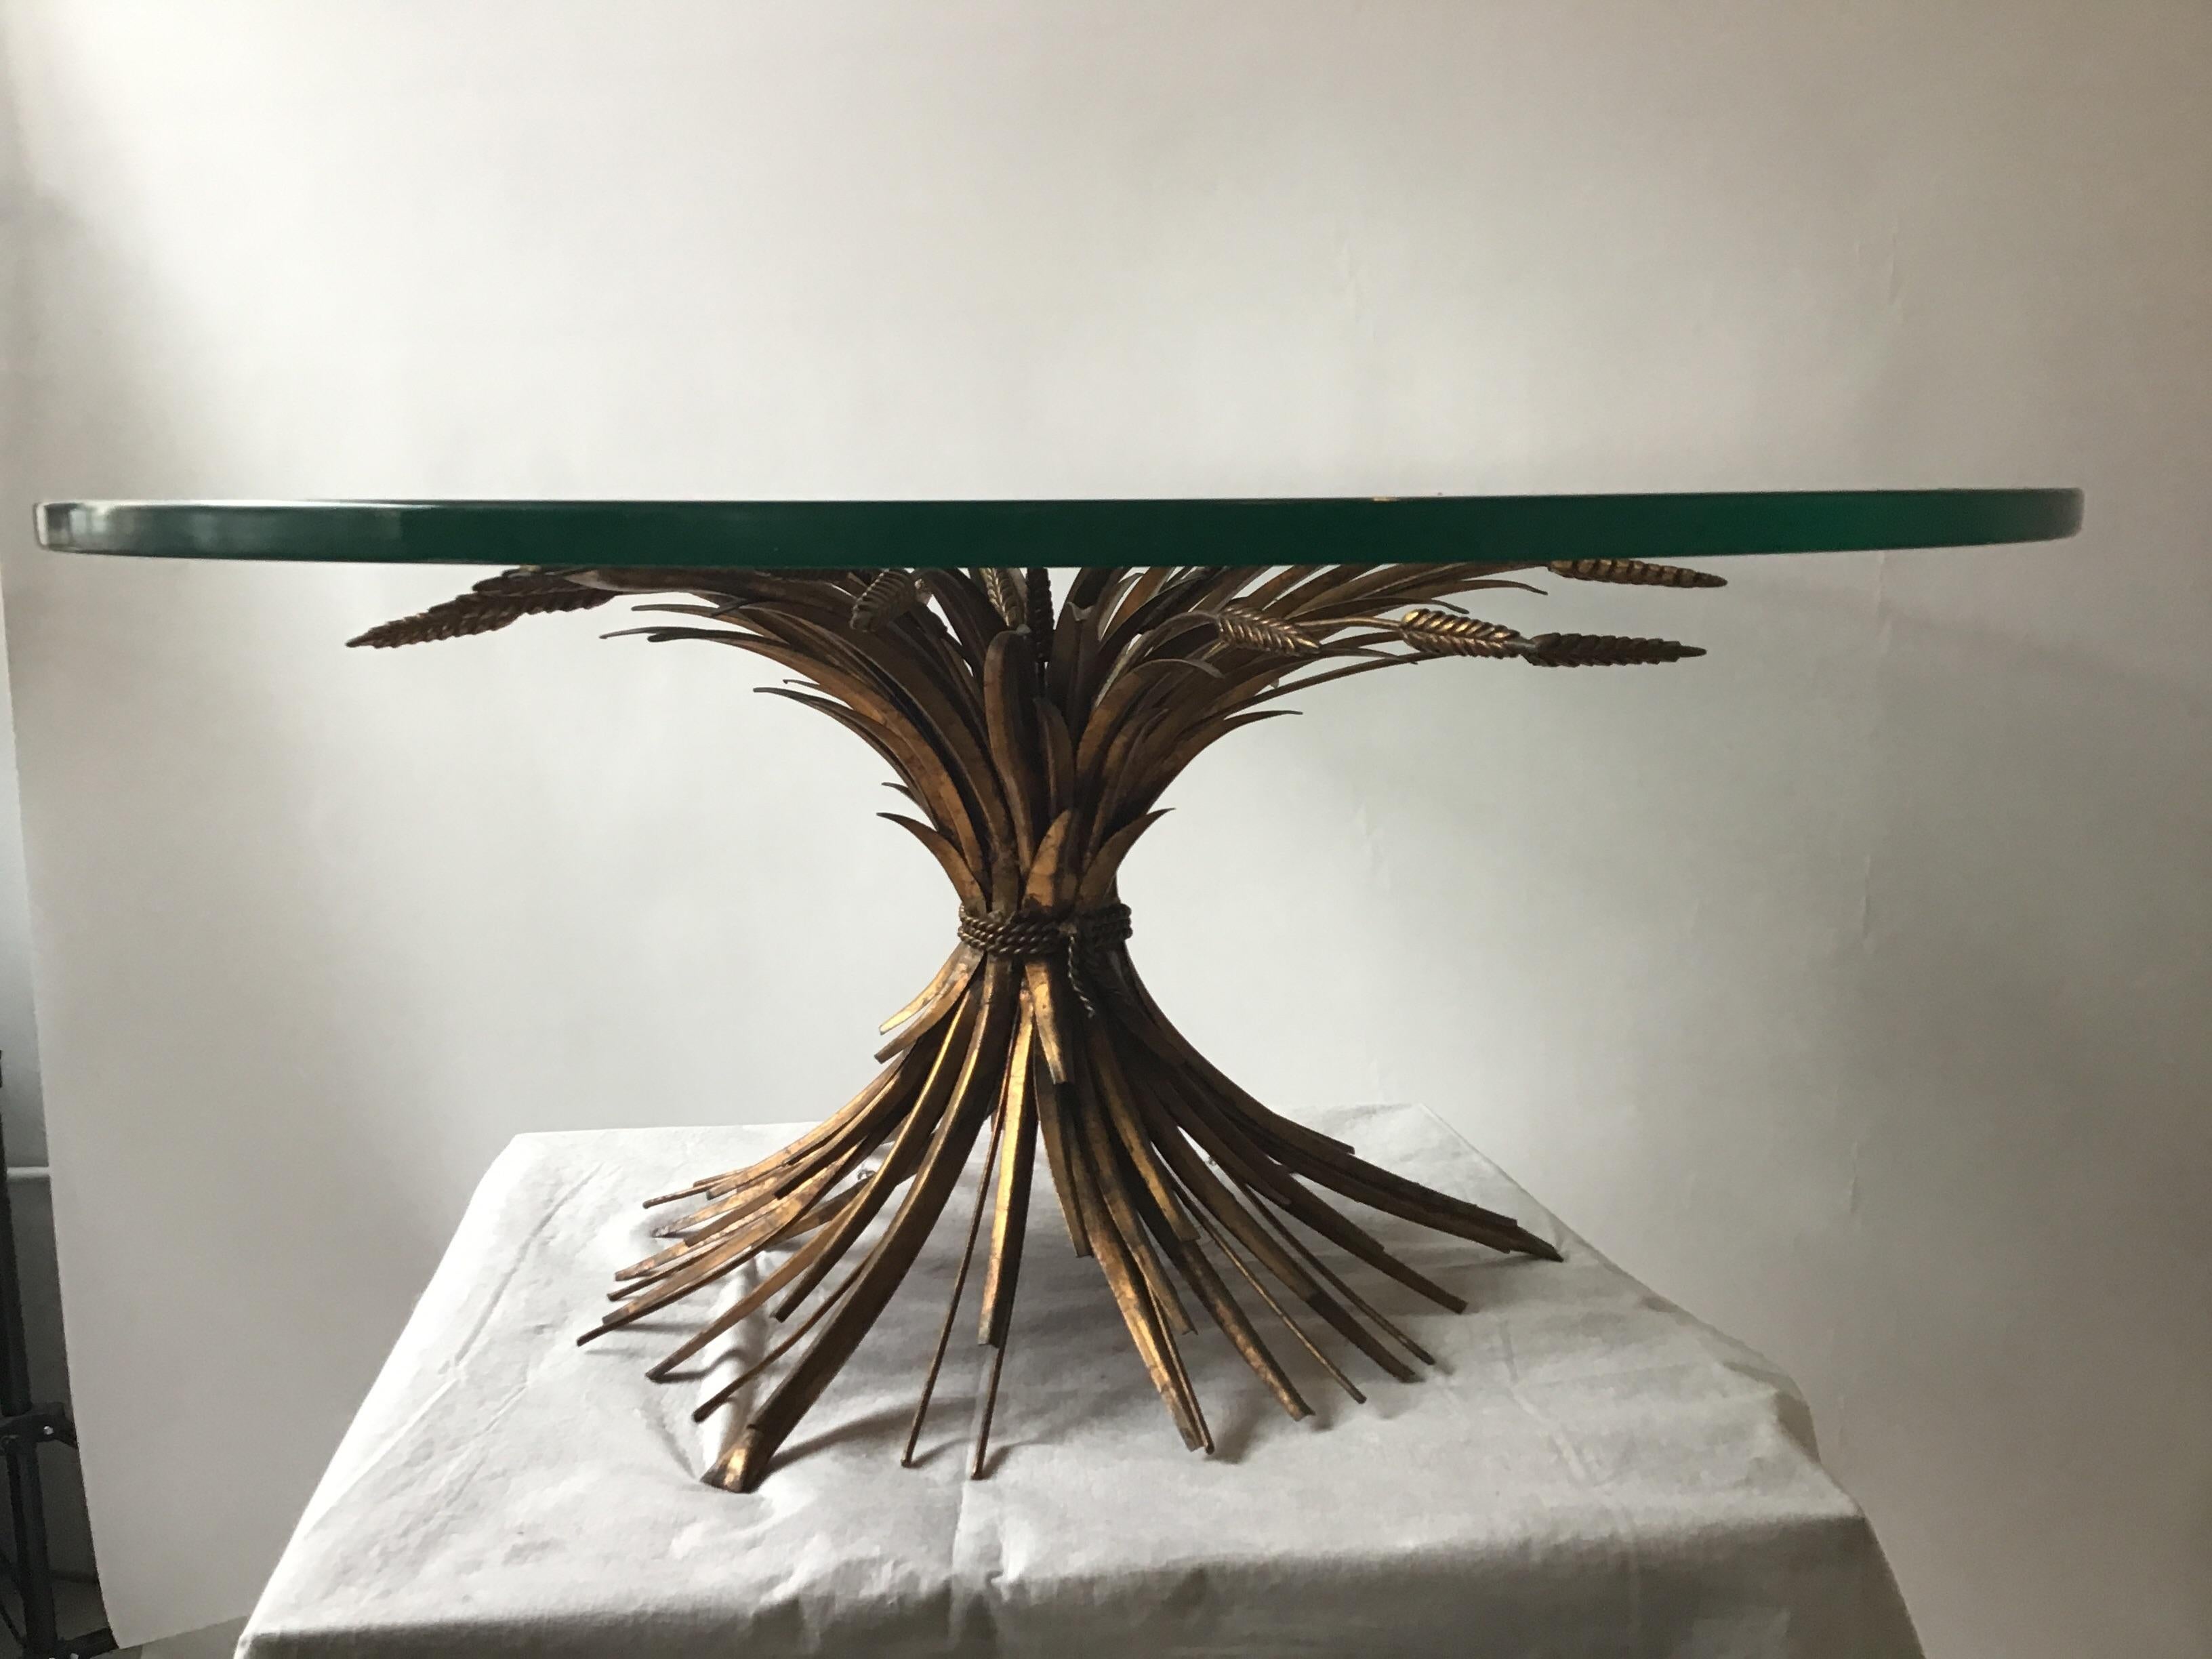 1960s Italian sheaf of wheat coffee table with thick glass top, from a Southampton estate.
Glass has 2 tiny chips on underside, and some scratches on top and side as shown in image 12.